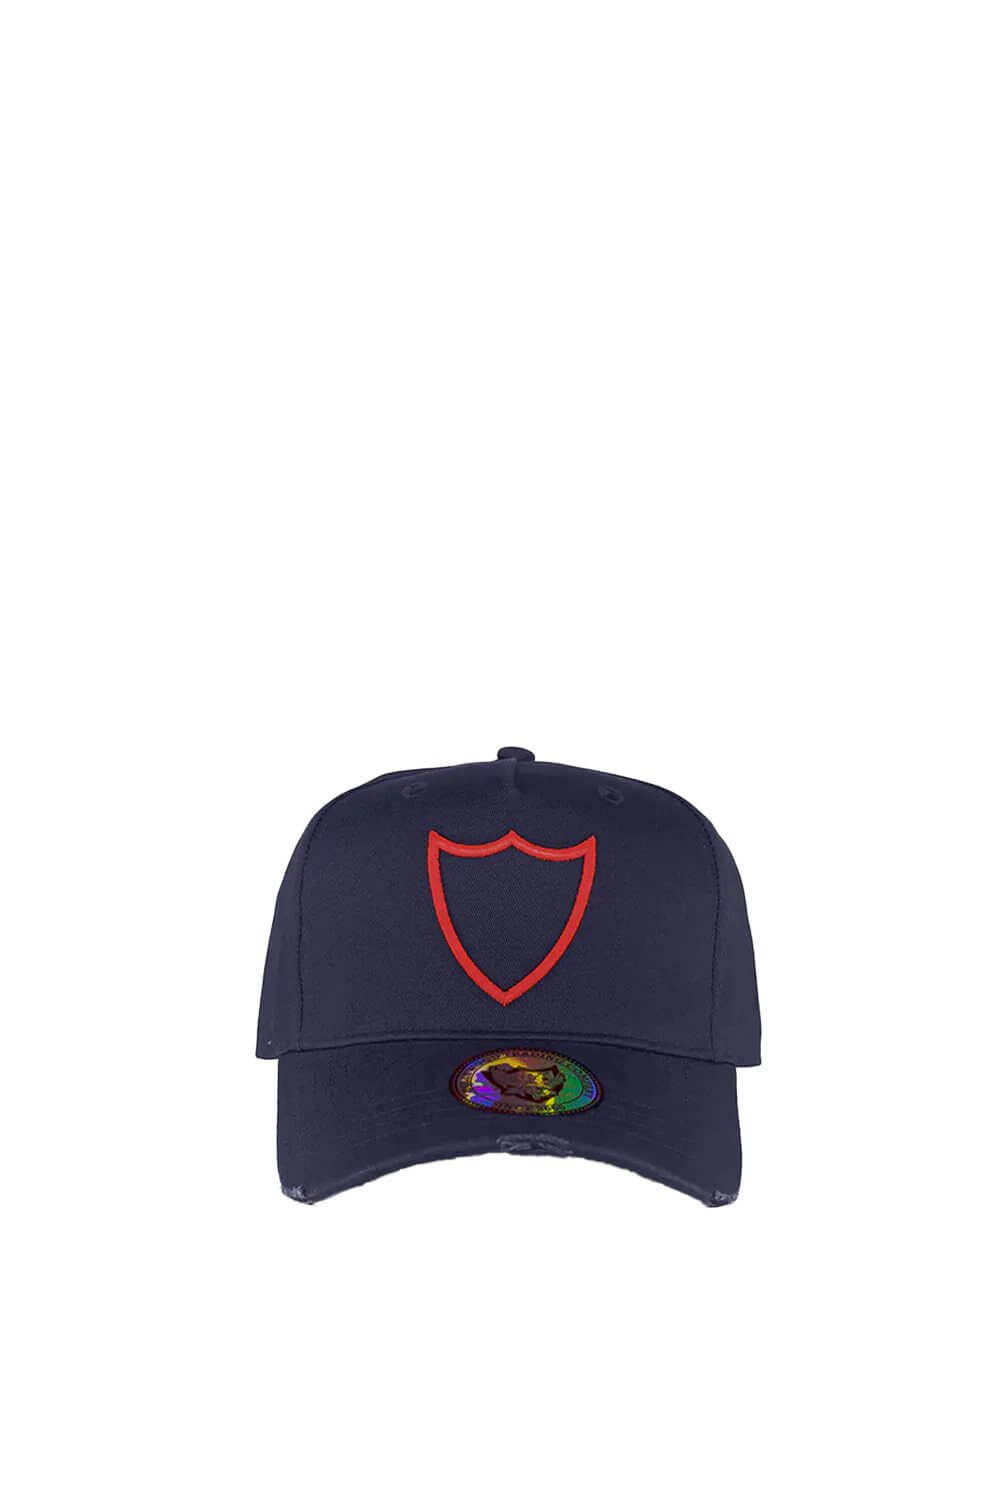 HTC LOGO BASEBALL CAP Baseball cap with preformed peak, round crown with eyelets, HTC Los Angeles shield logo embroidered on the front, adjustable strap on the back. One size fits all. 100% cotton. HTC LOS ANGELES